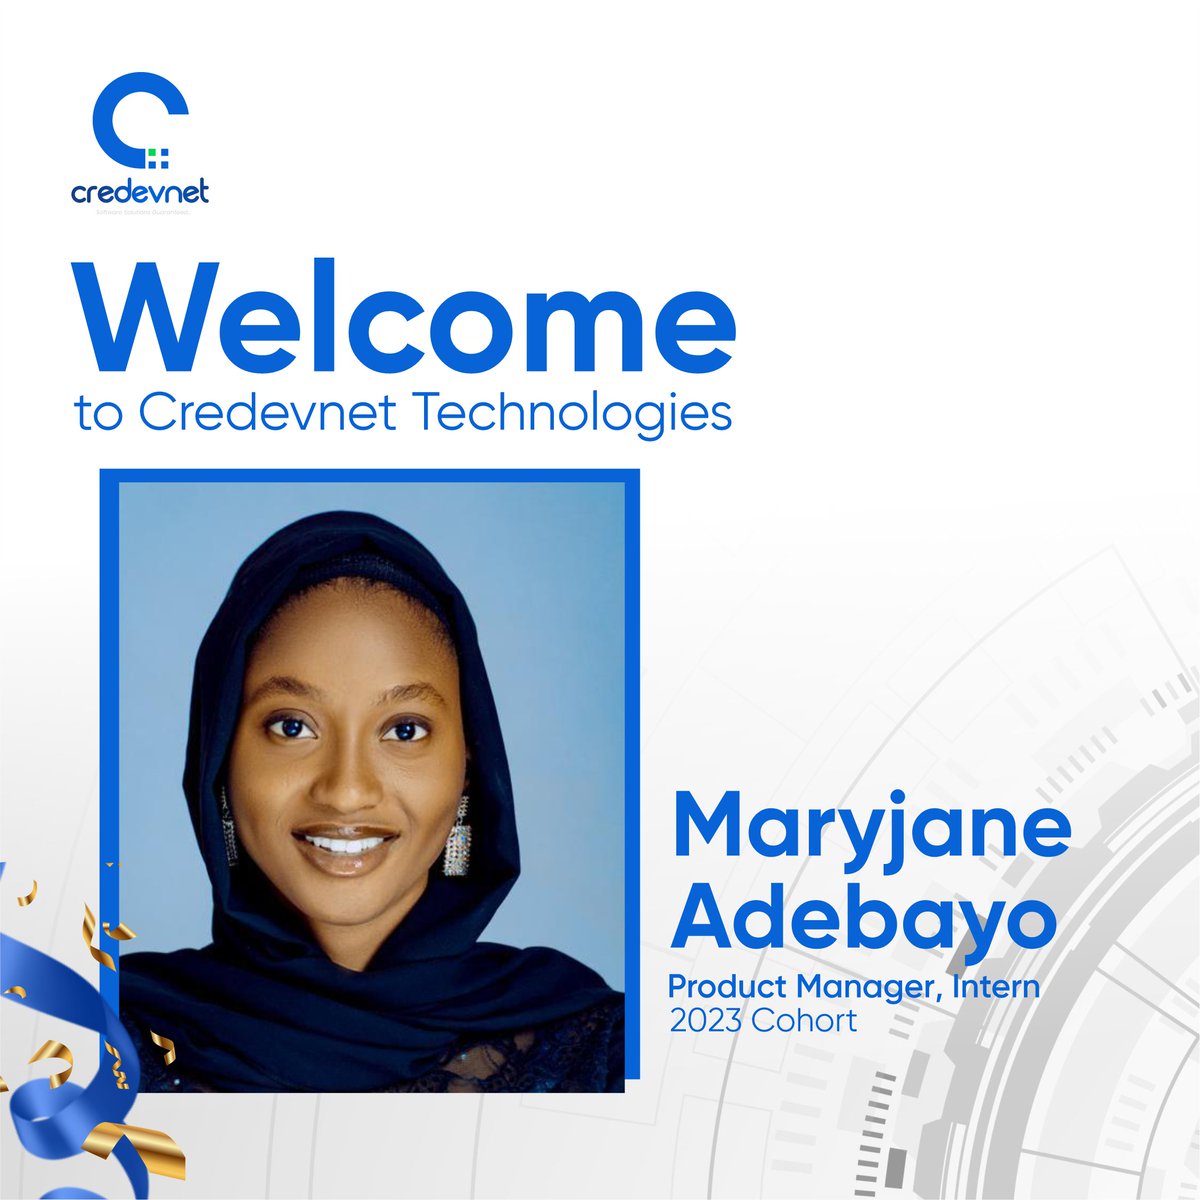 🥳Exciting news!

few days after graduation, Just landed a new internship position at Credevnet Technologies @IRecplus and couldn't be more excited!💃Looking forward to learning new skills gaining valuable experience and contributing to the team
 #newbeginnings #careerdevelopment